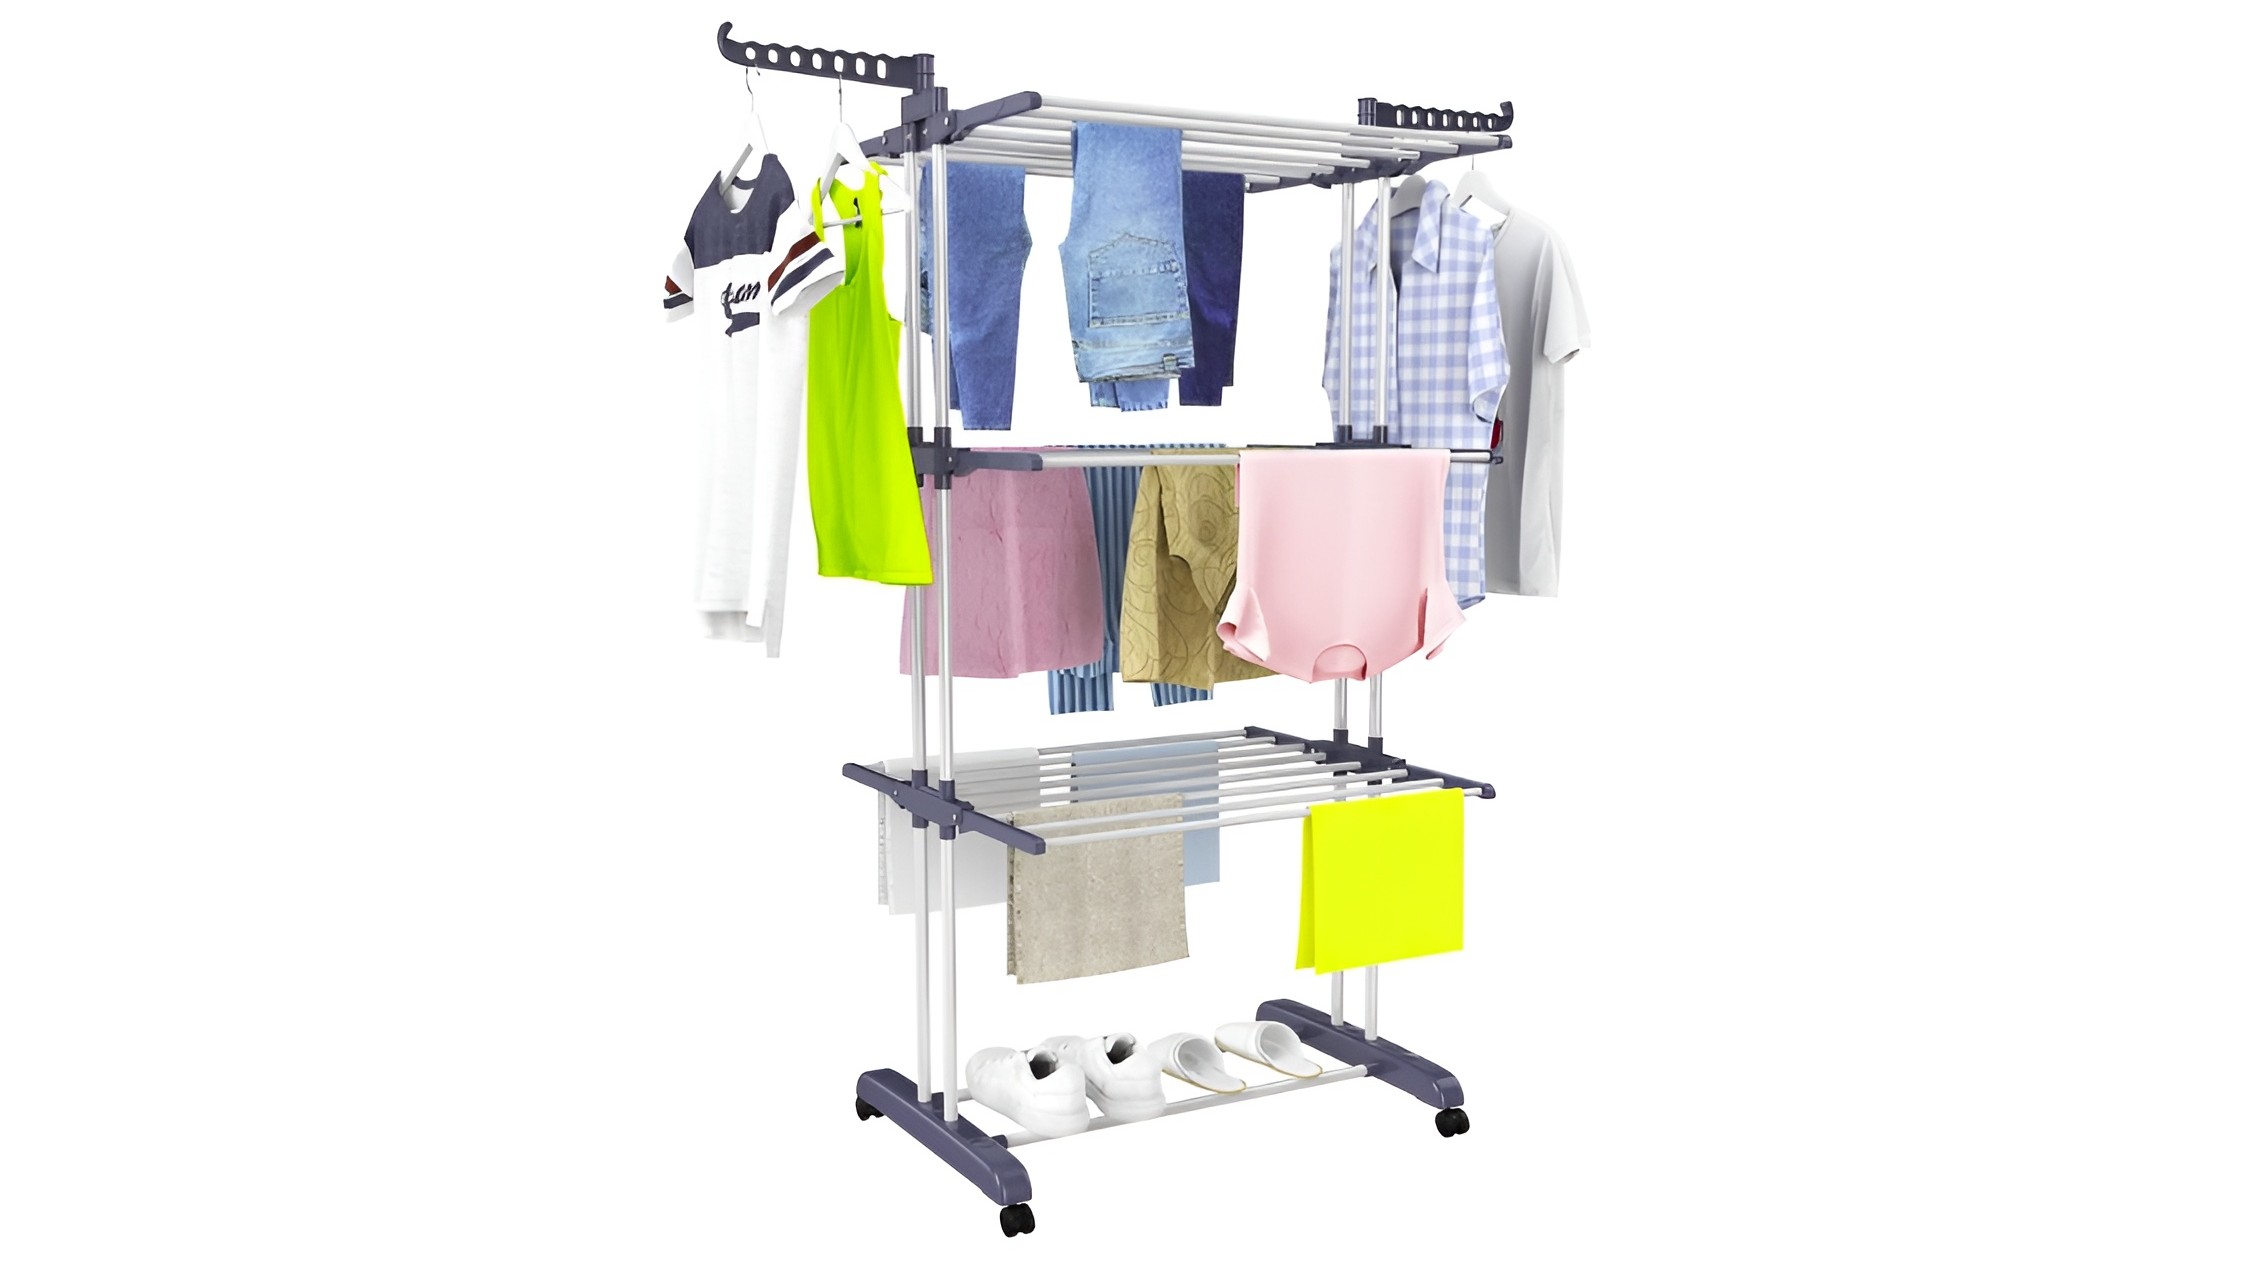 Heated Clothes Airer HOMIDEC Oversized Foldable Stainless Steel Clothing Rack